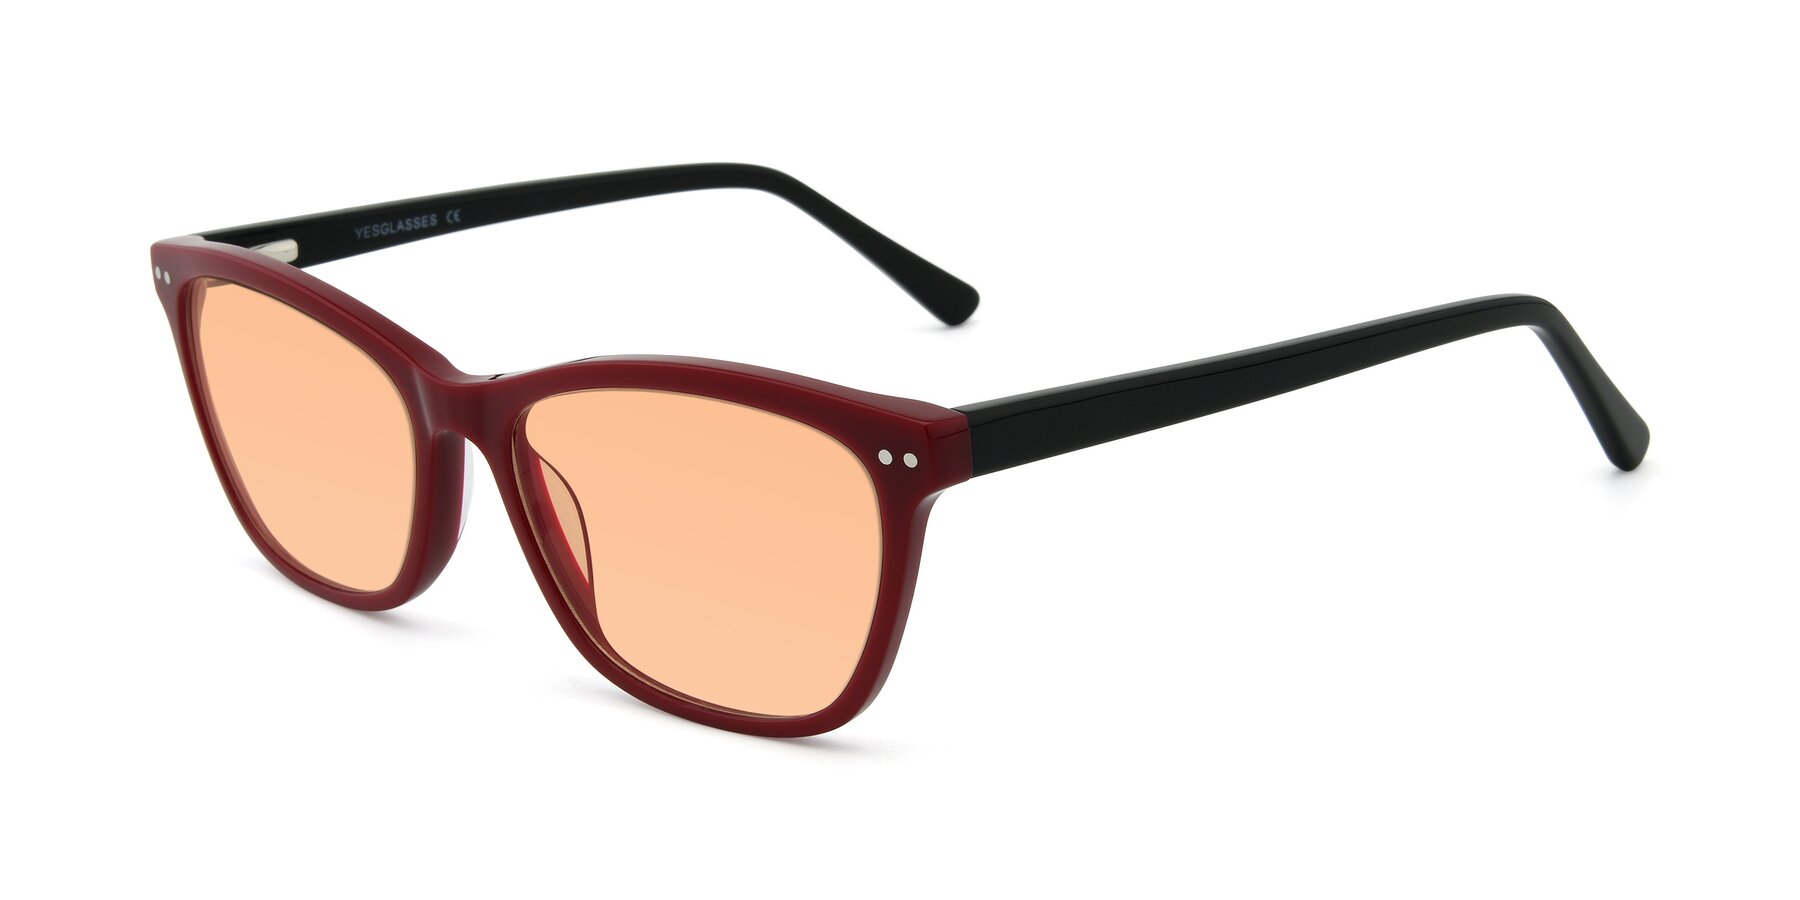 Angle of 17350 in Wine with Light Orange Tinted Lenses